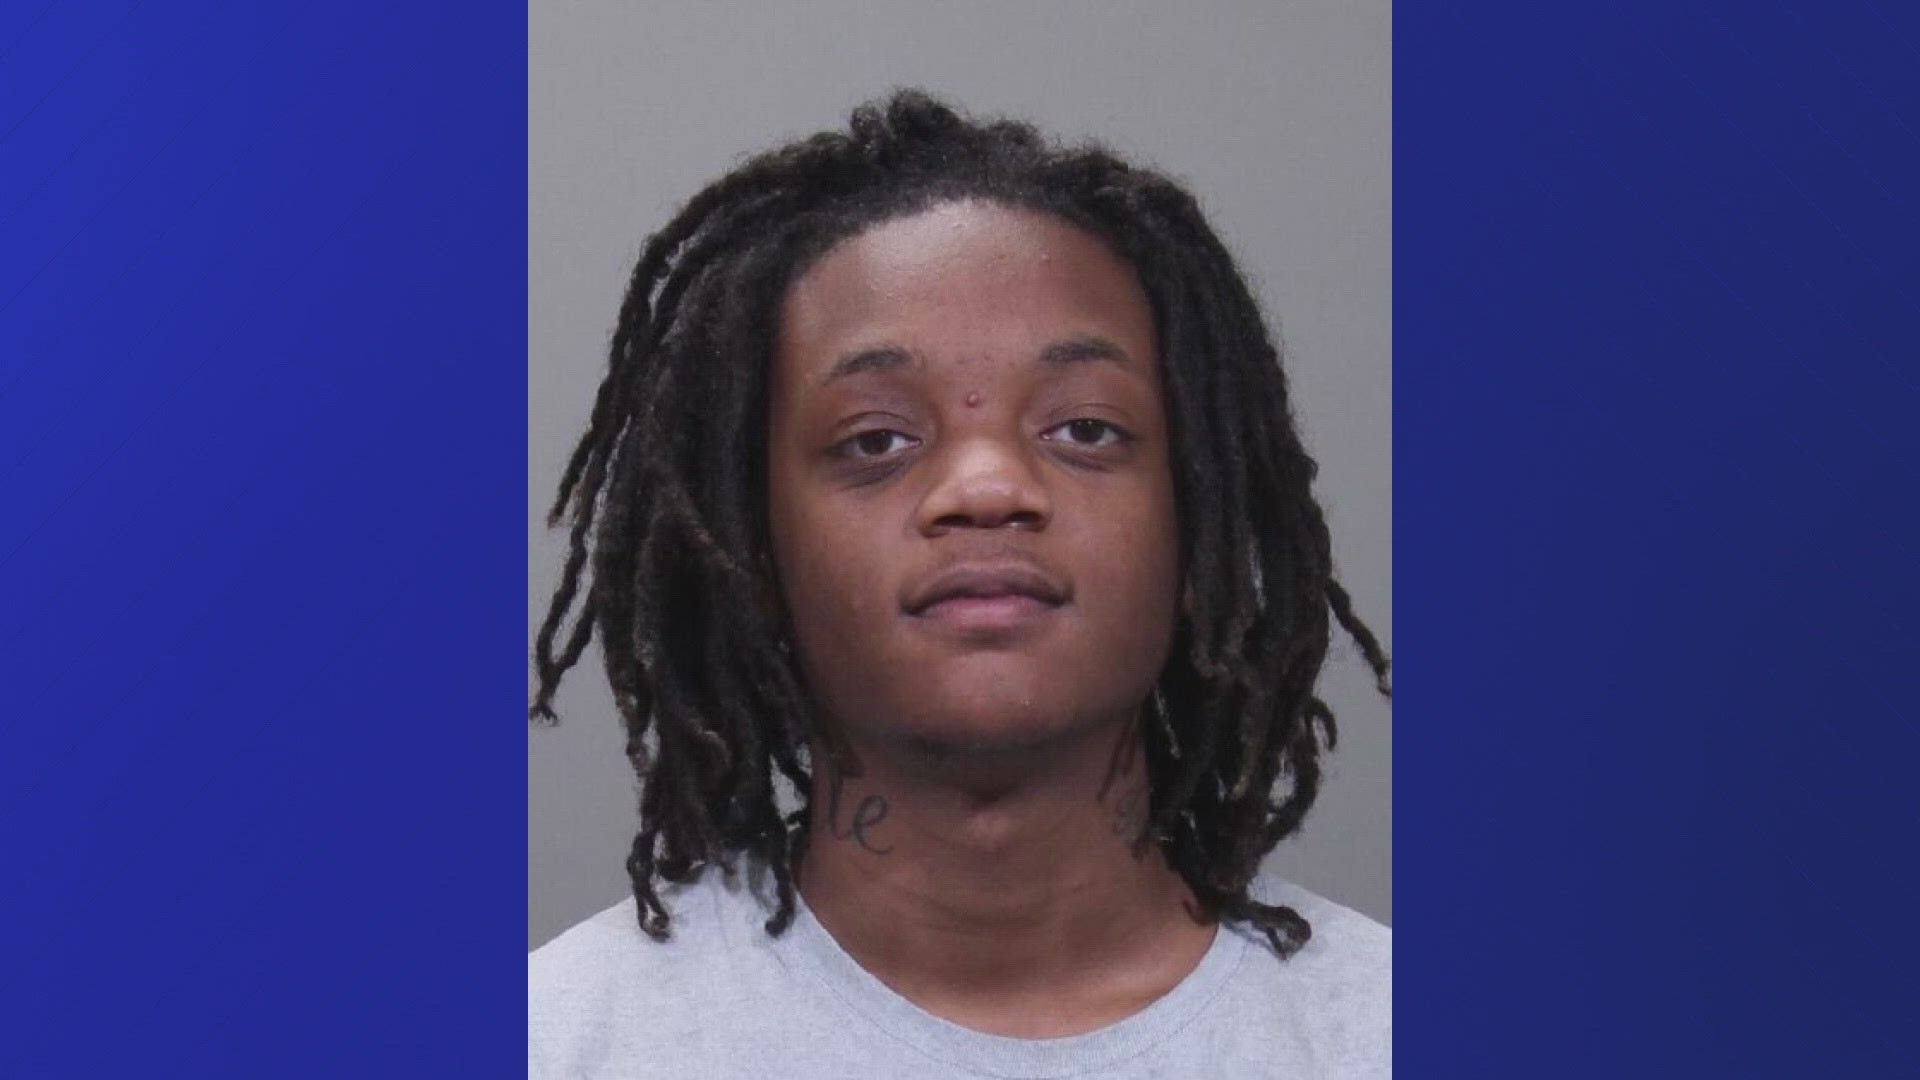 Michael Bowles, 20, was indicted for aggravated murder, two charges of murder, aggravated robbery, abuse of a corpse and having a weapon under disability.